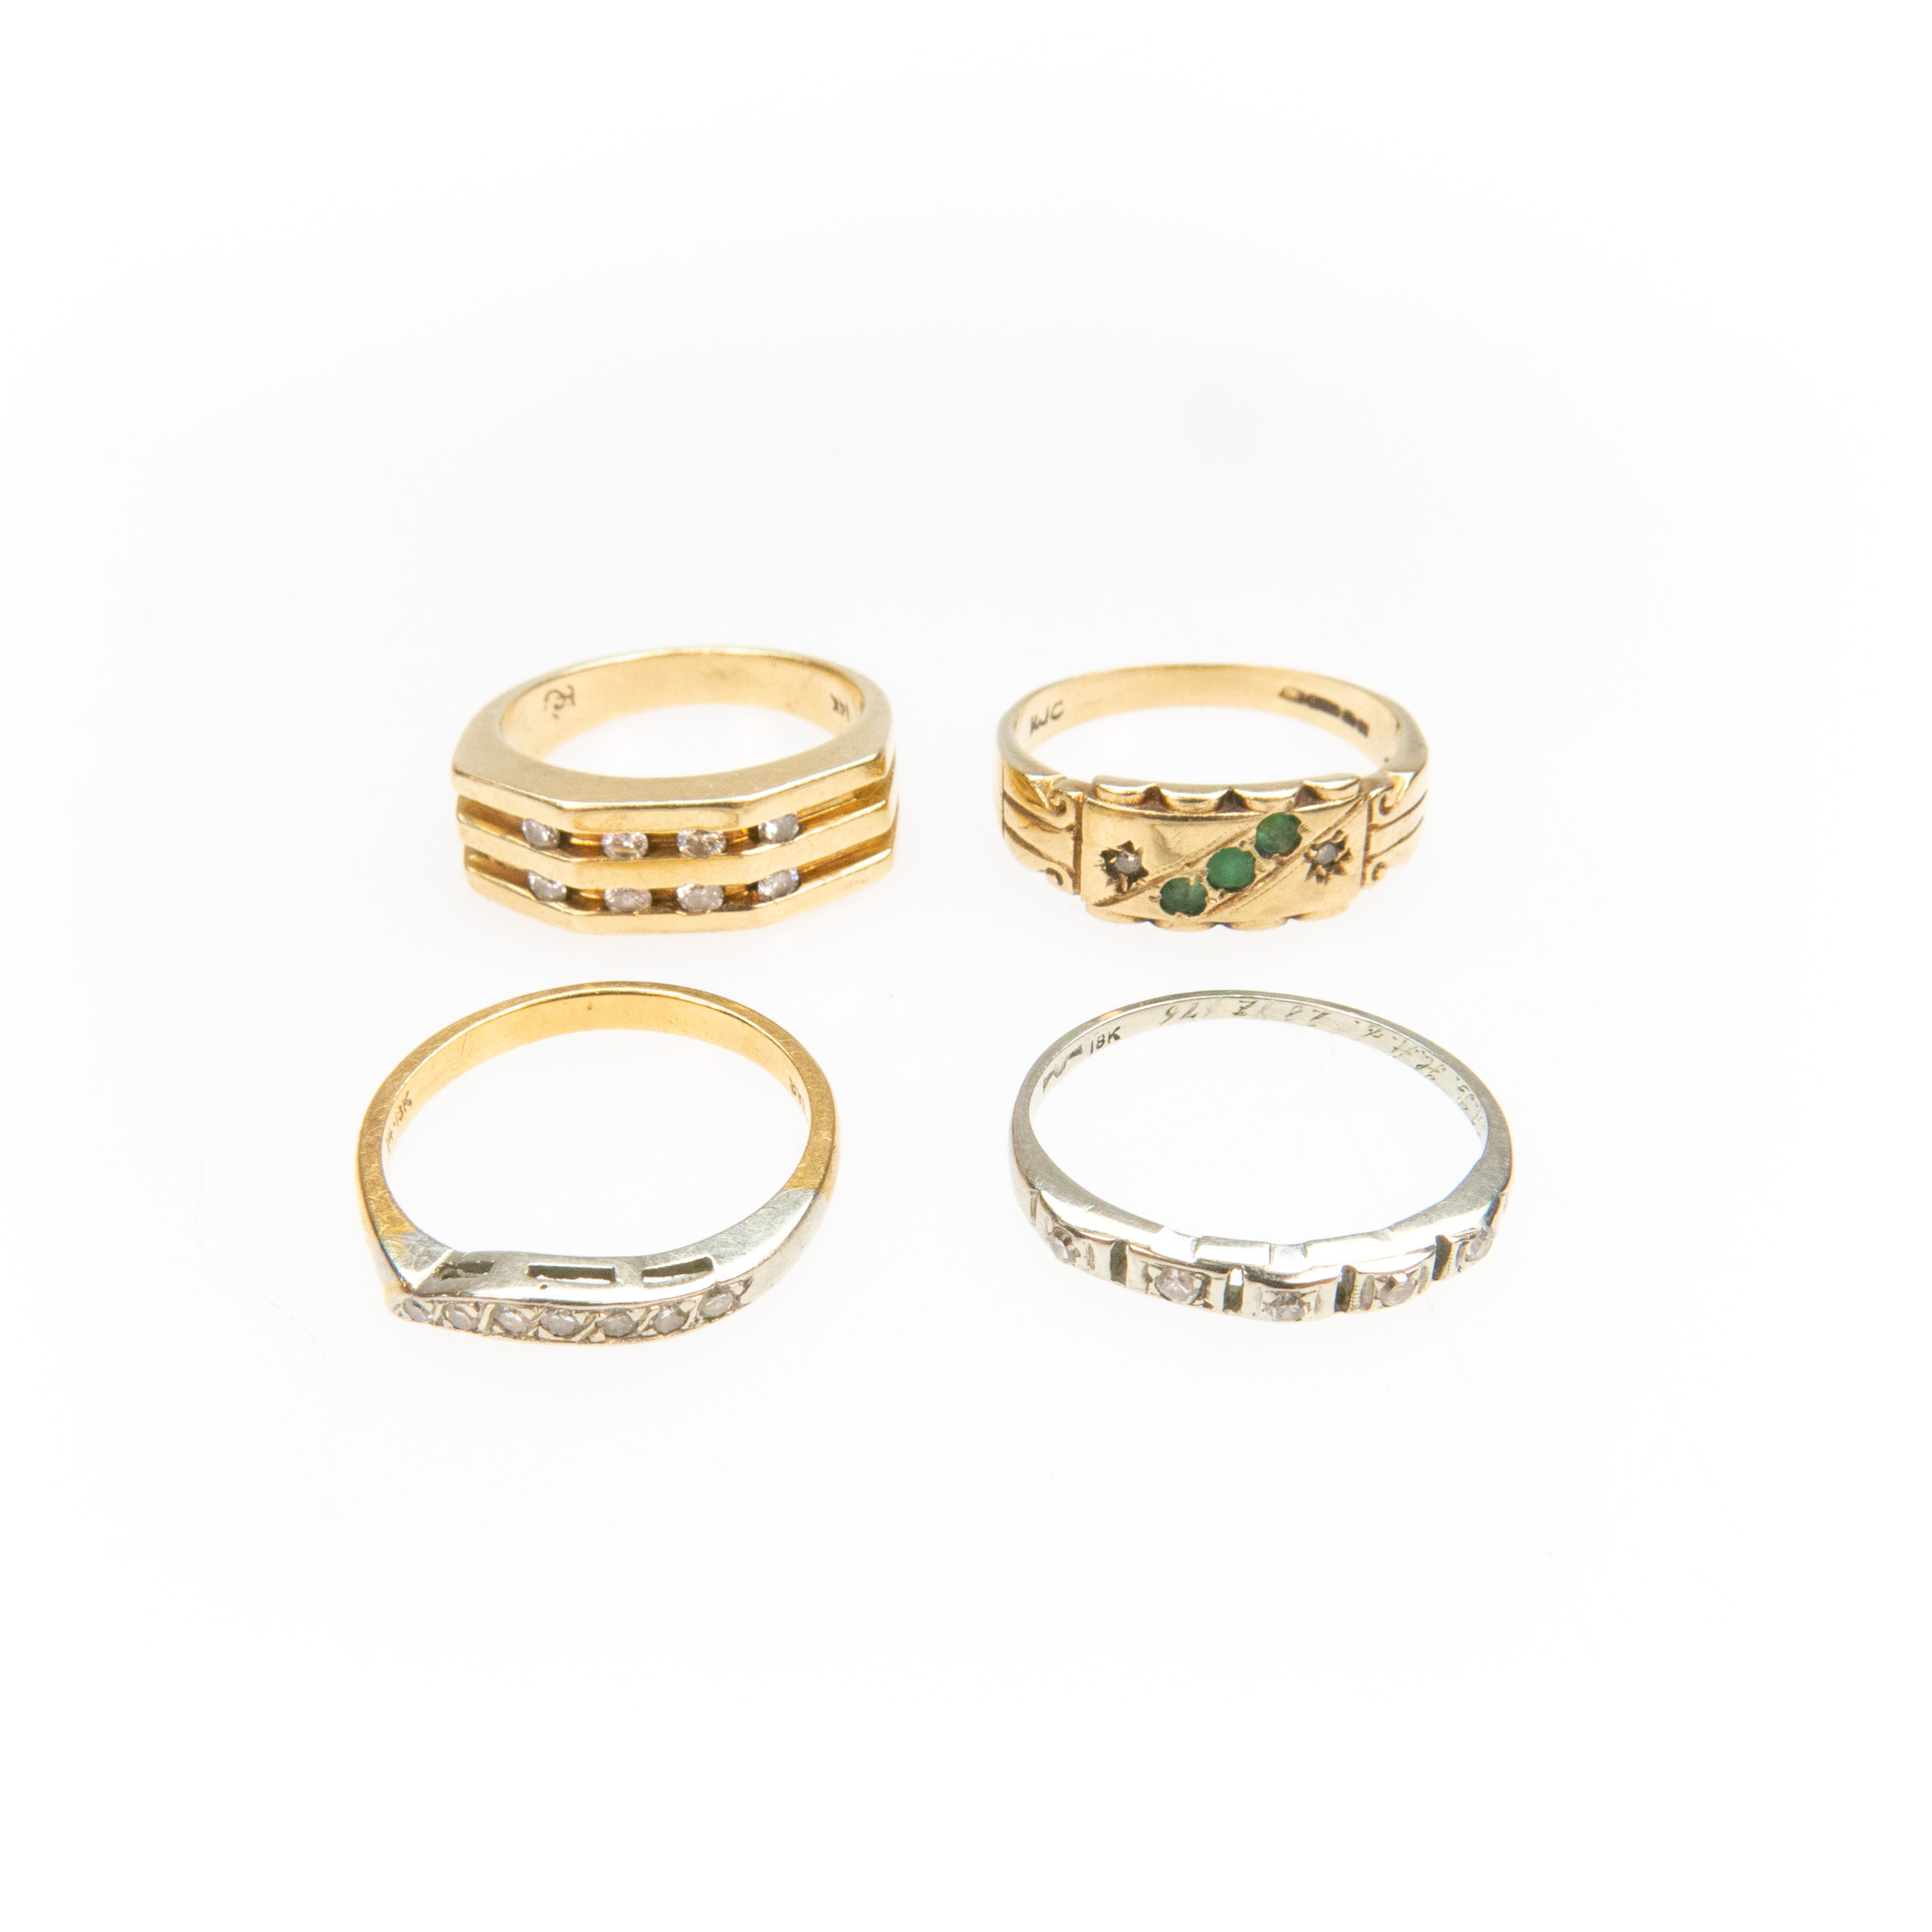 1 X 9K, 1 X 18K And 2 X 14K Gold Rings